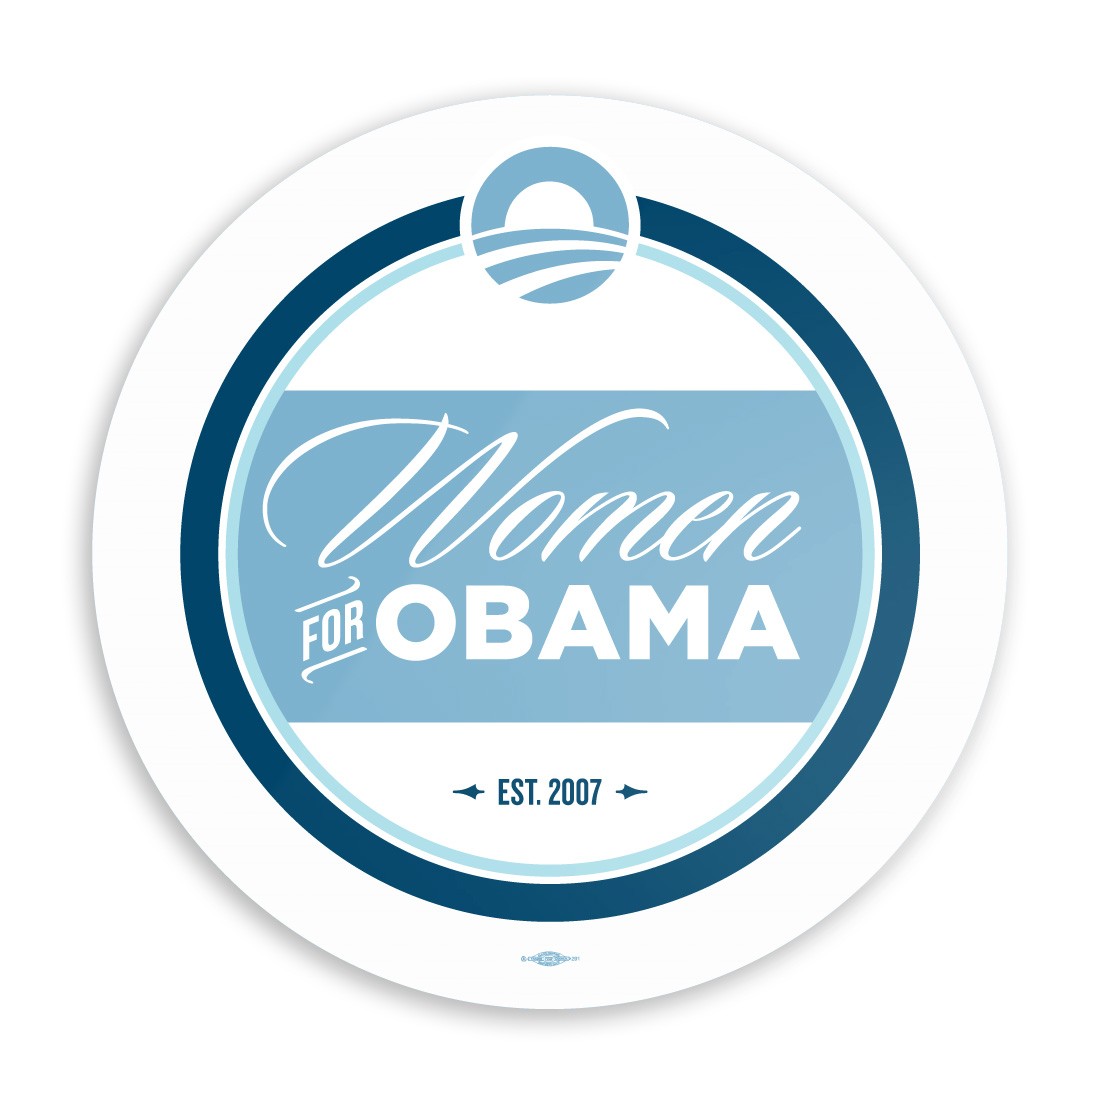 Women for Obama event in Ypsilanti THIS THURSDAY featuring Obama political director Katherine Archuleta